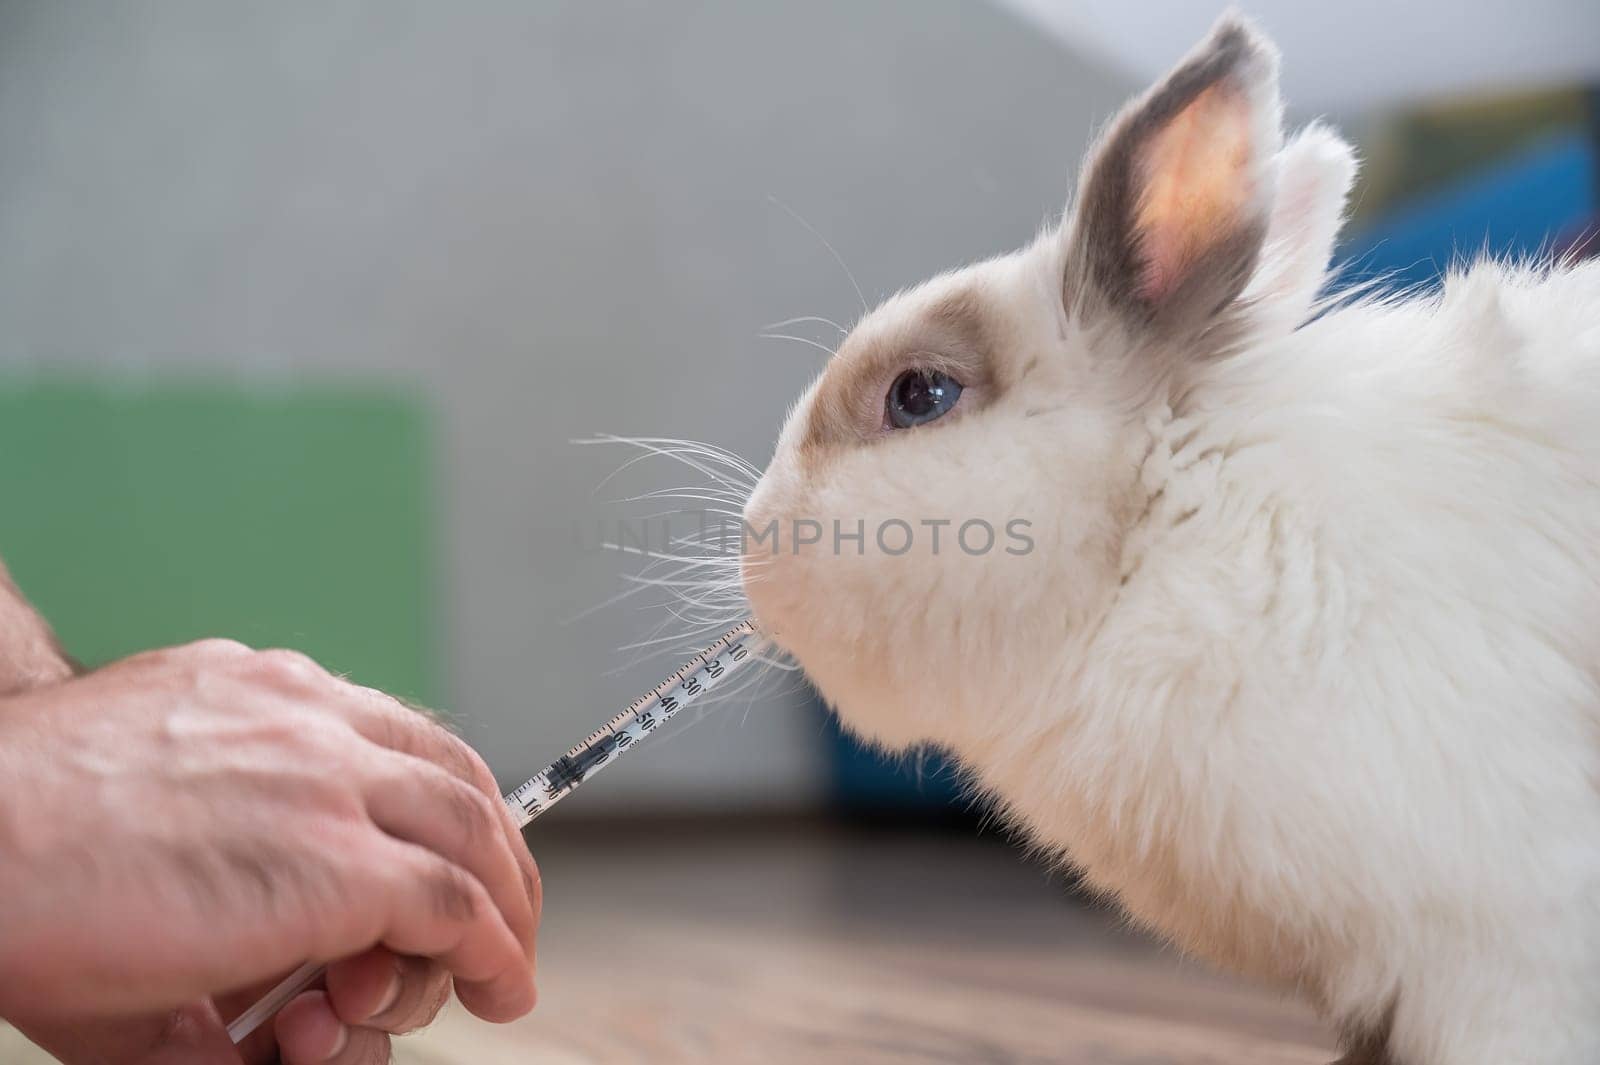 A man gives a rabbit medicine from a syringe. Bunny drinks from a syringe. by mrwed54